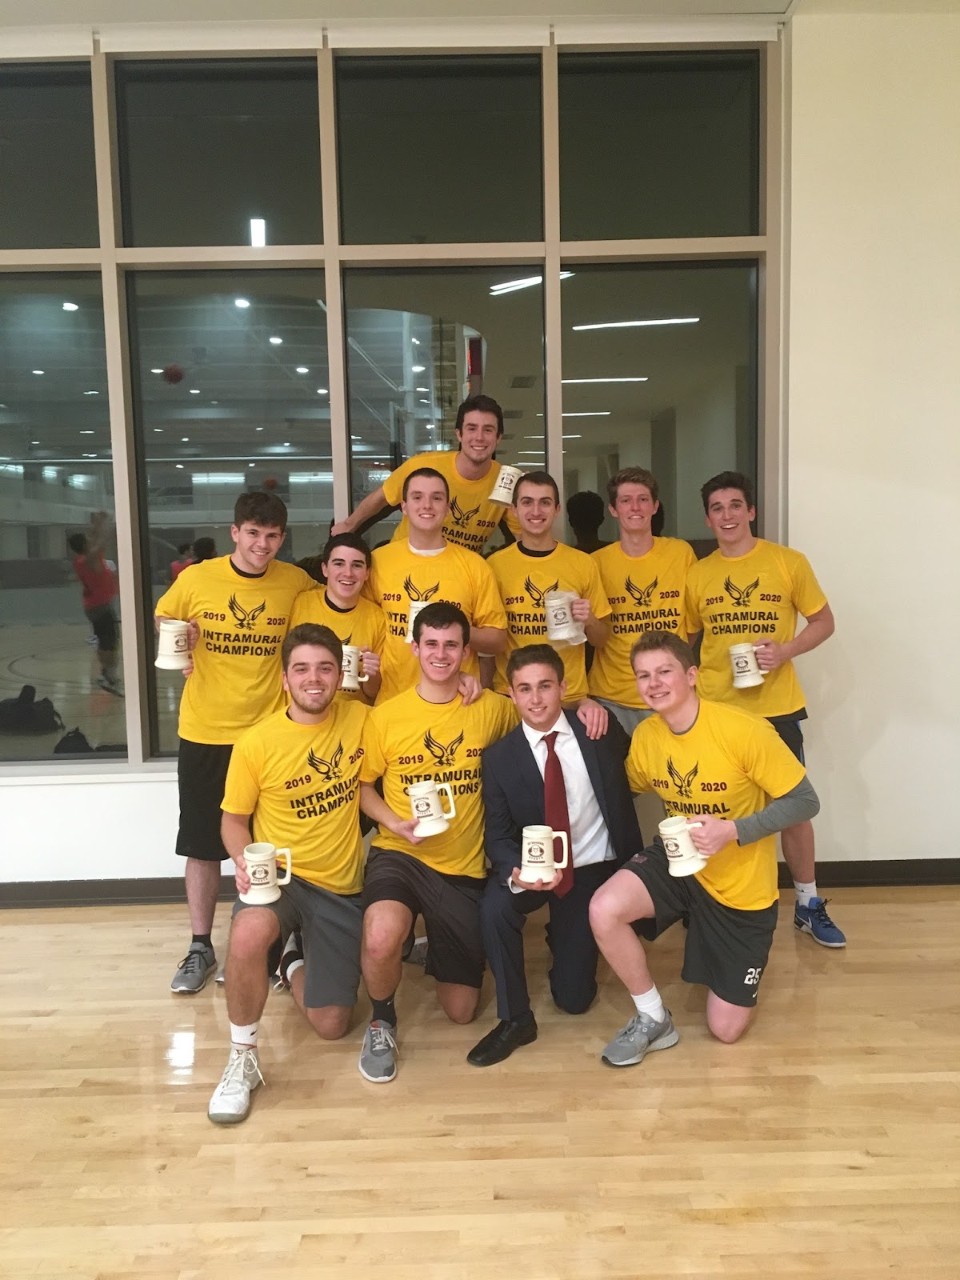 Christian Guma poses with fellow members of the Boston College Intramural Program